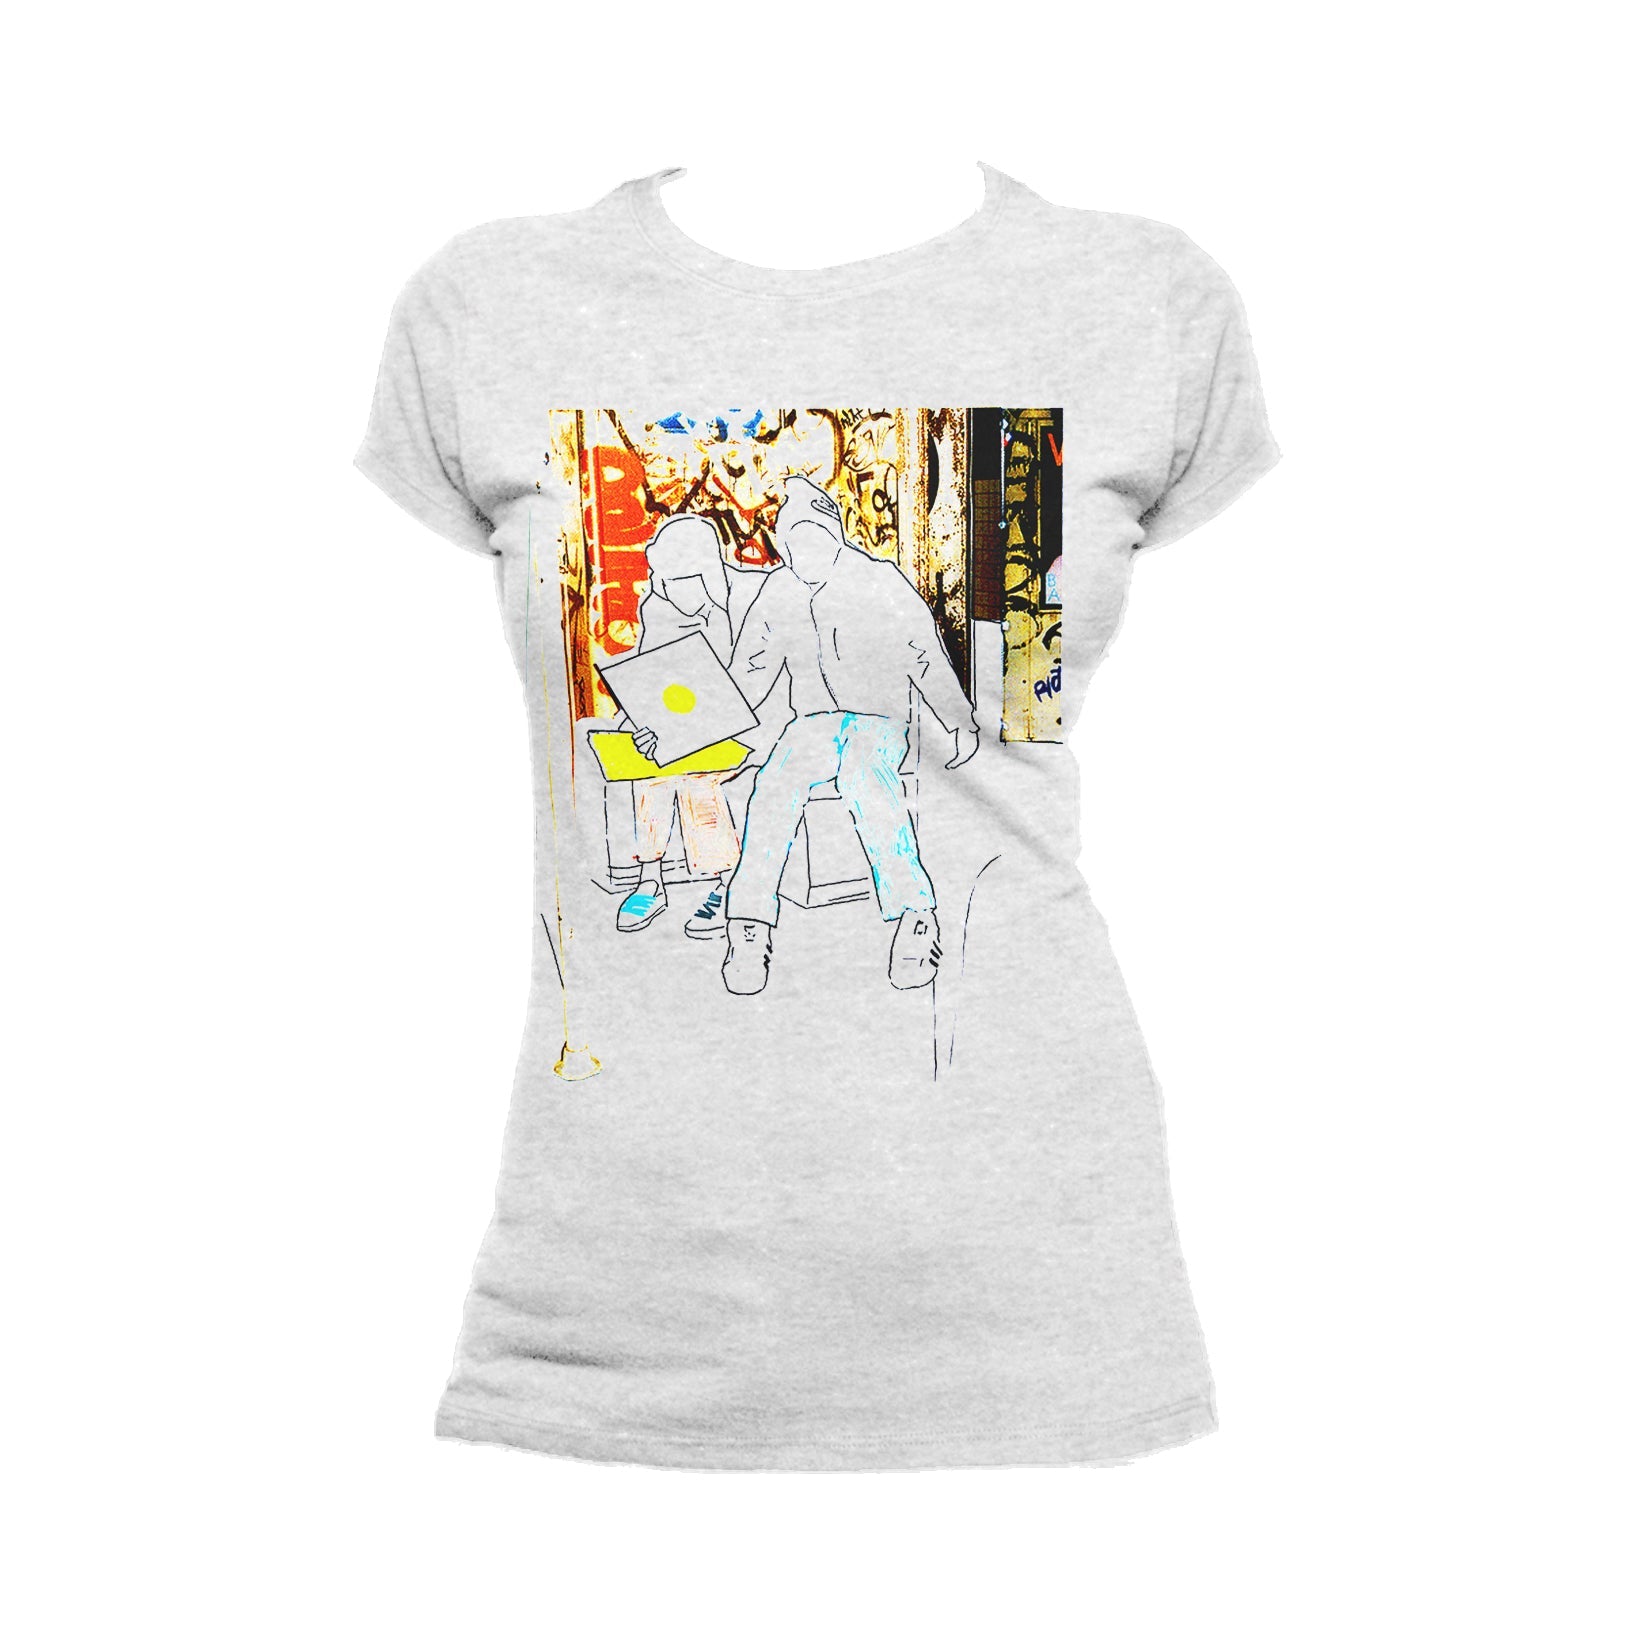 US Brand X Old's Kool Record Shopping Official Women's T-Shirt ()